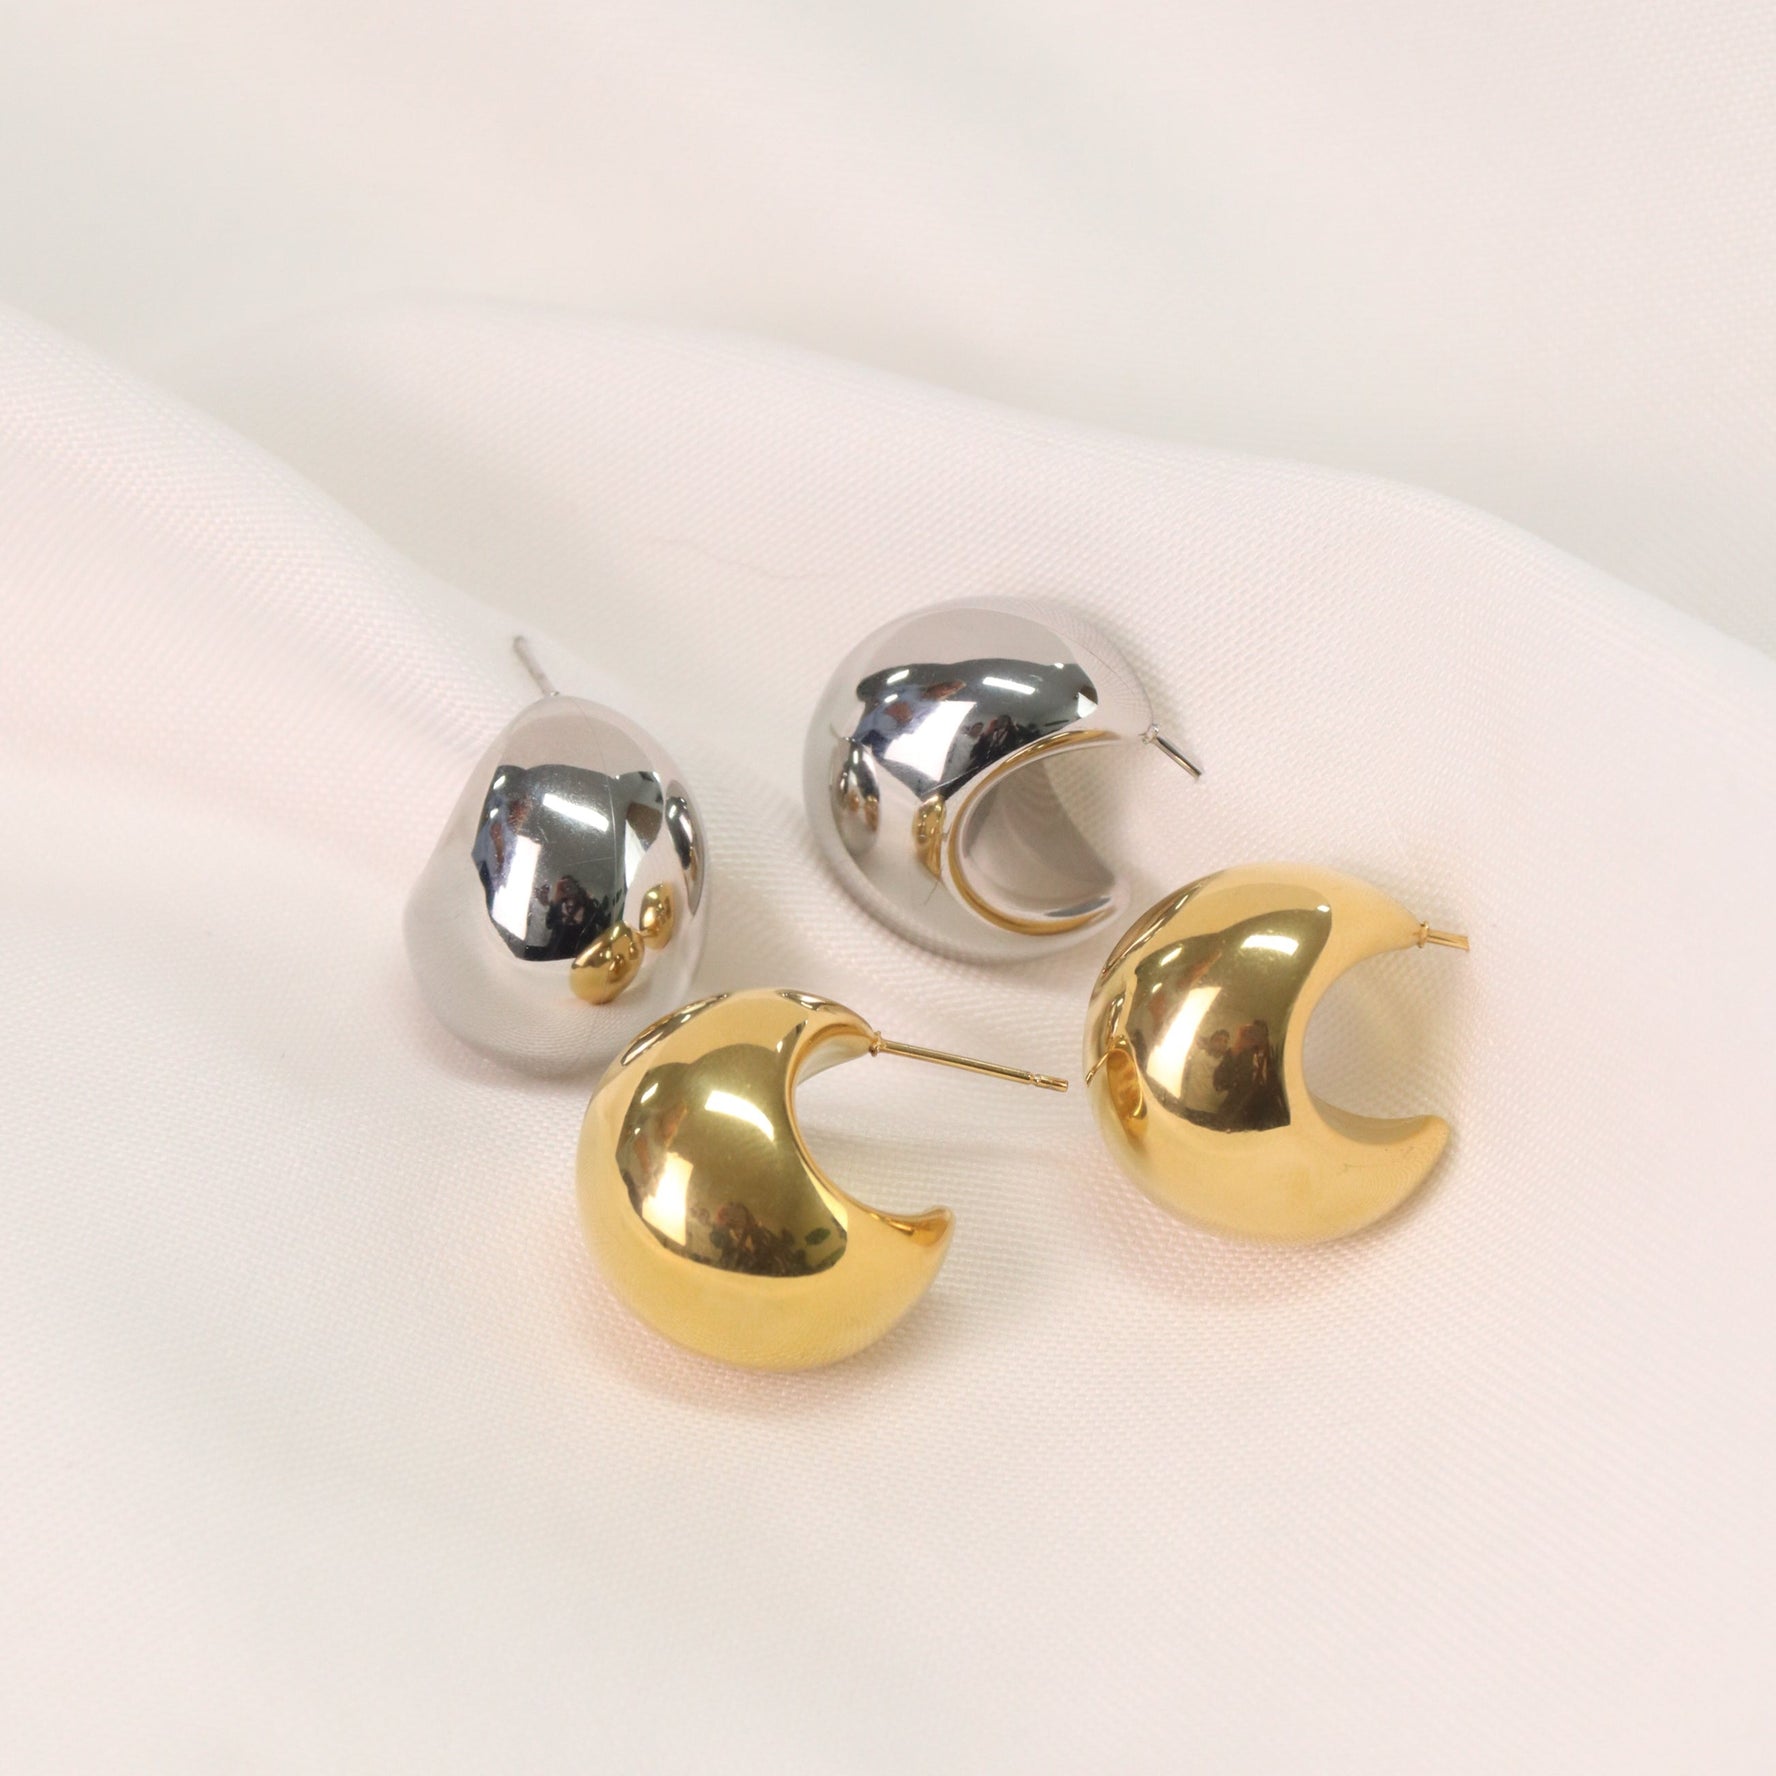 Ella | Chunky Gold or Silver Crescent Moon Statement Earrings